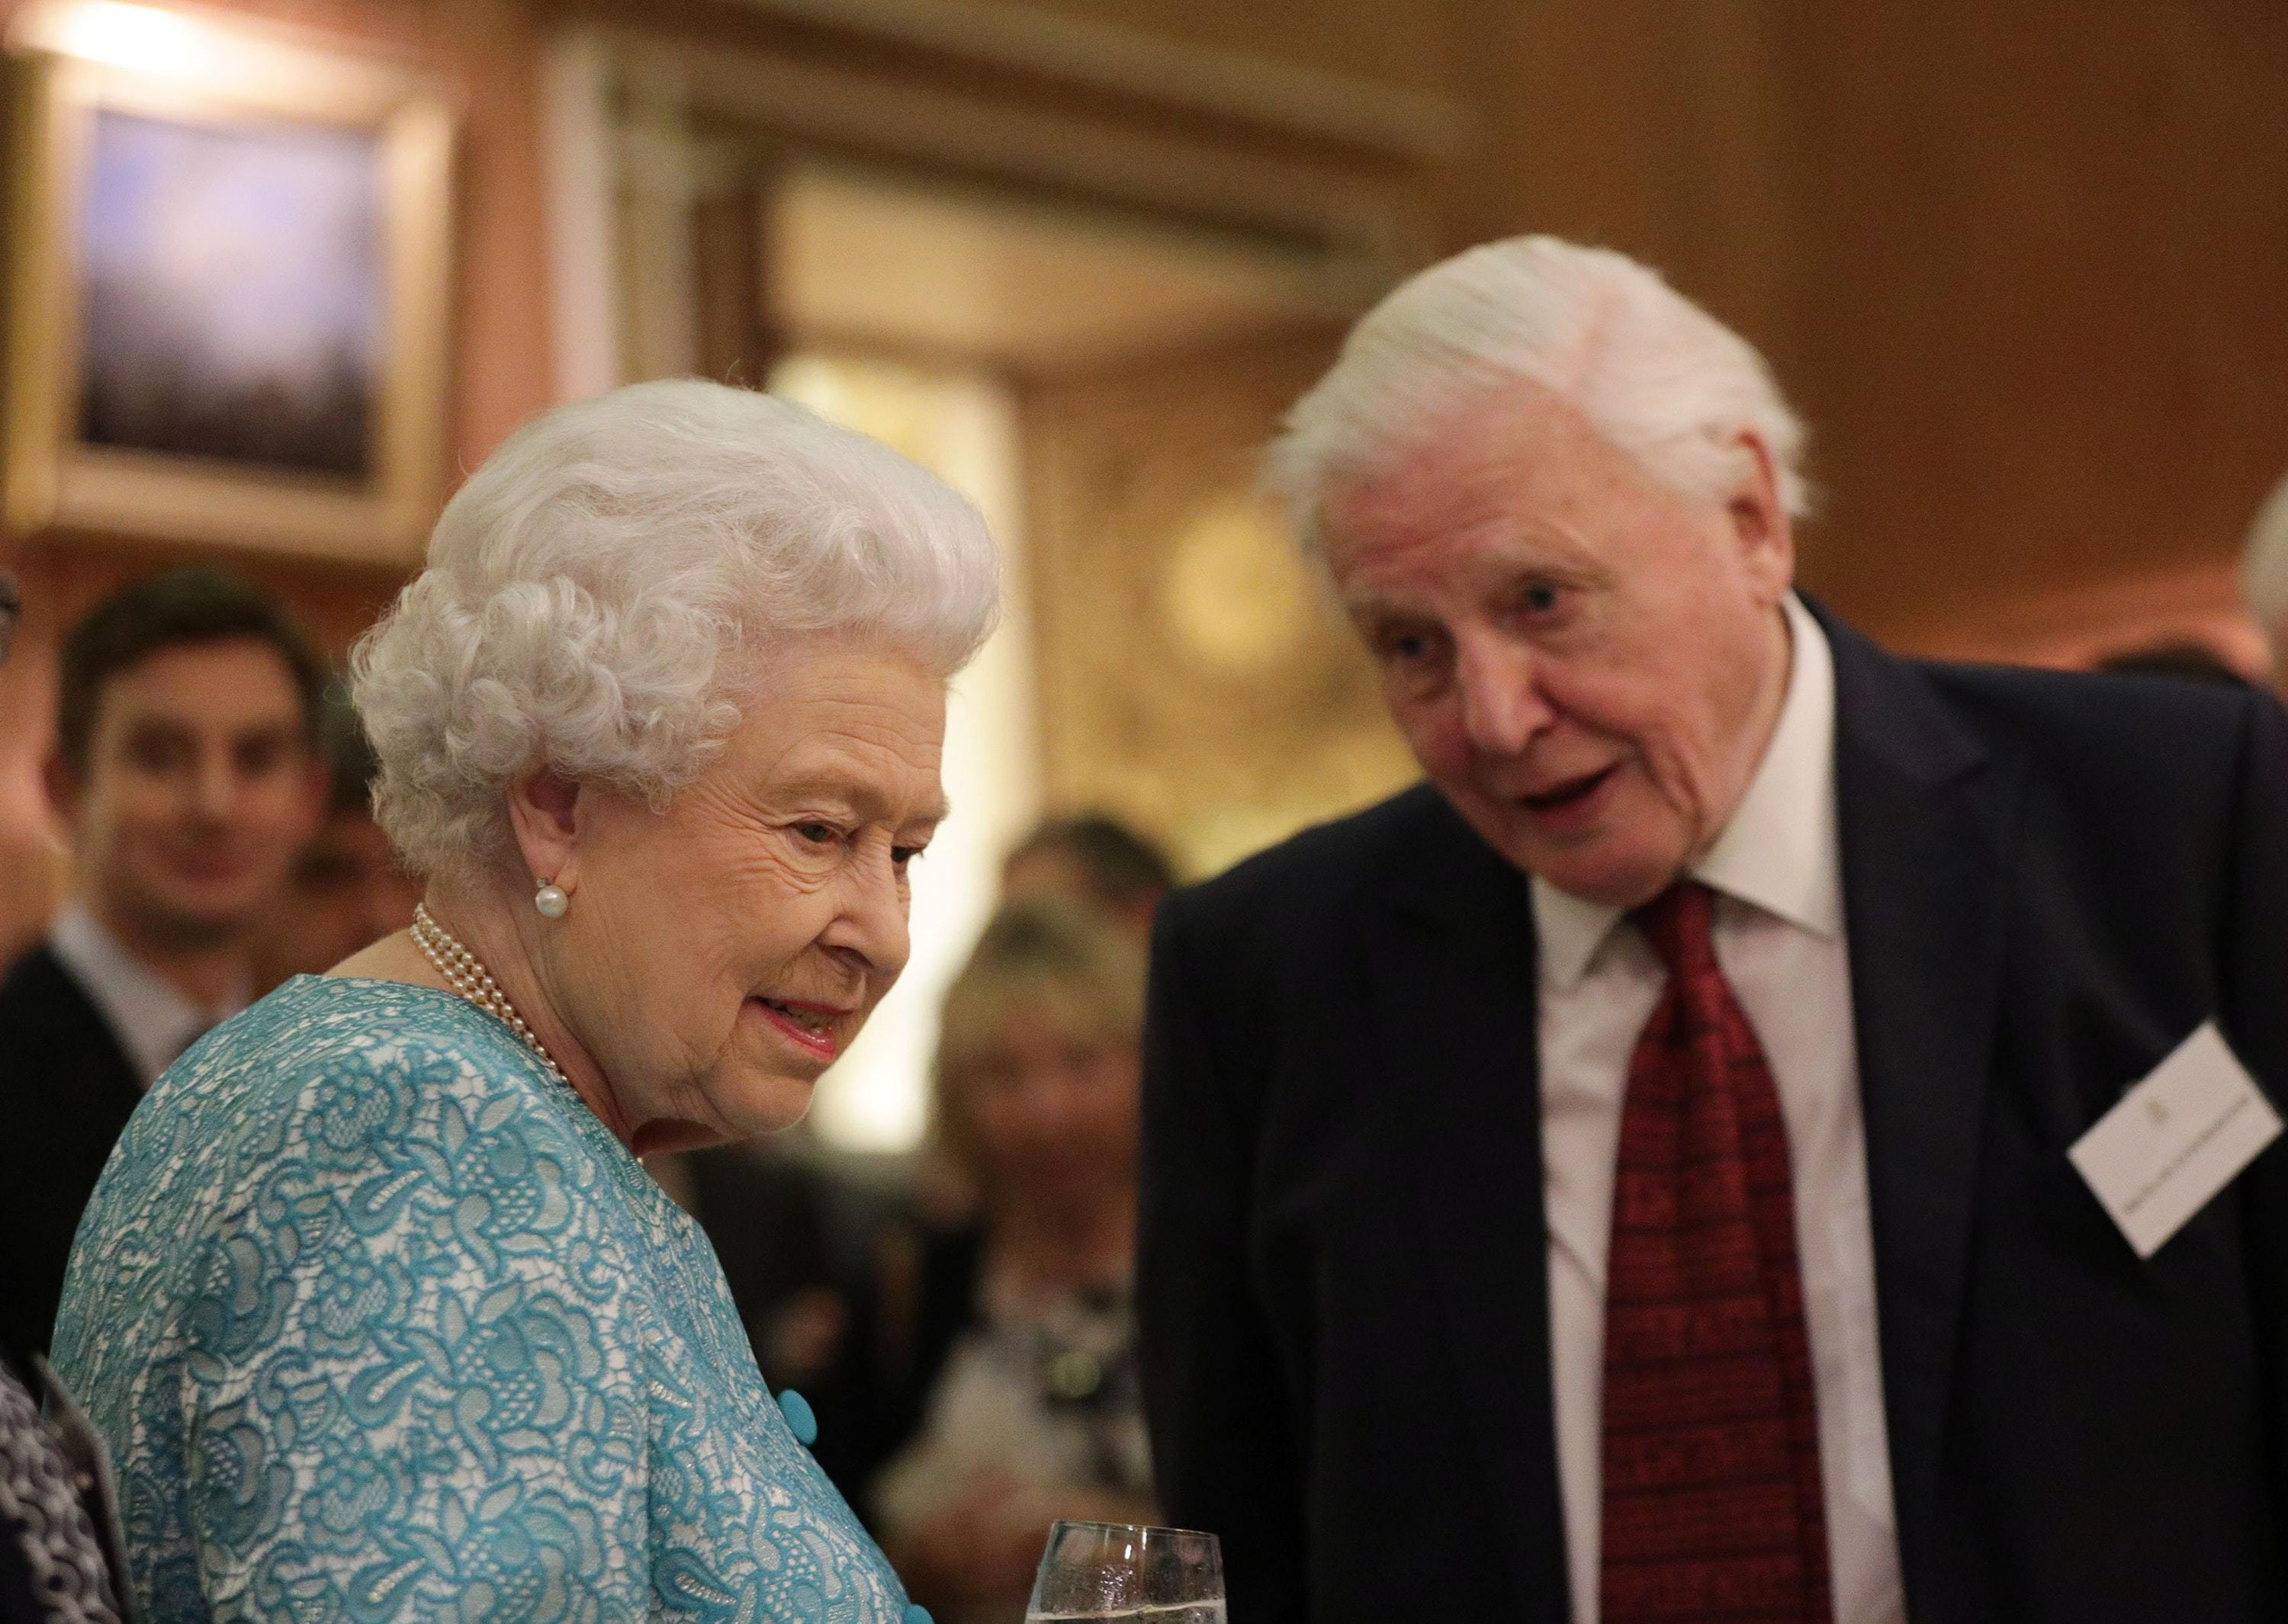 The Queen and Sir David Attenborough, pictured during a Queen’s Commonwealth Canopy event at Buckingham Palace, will appear in a documentary about the project. (Yui Mok/PA)